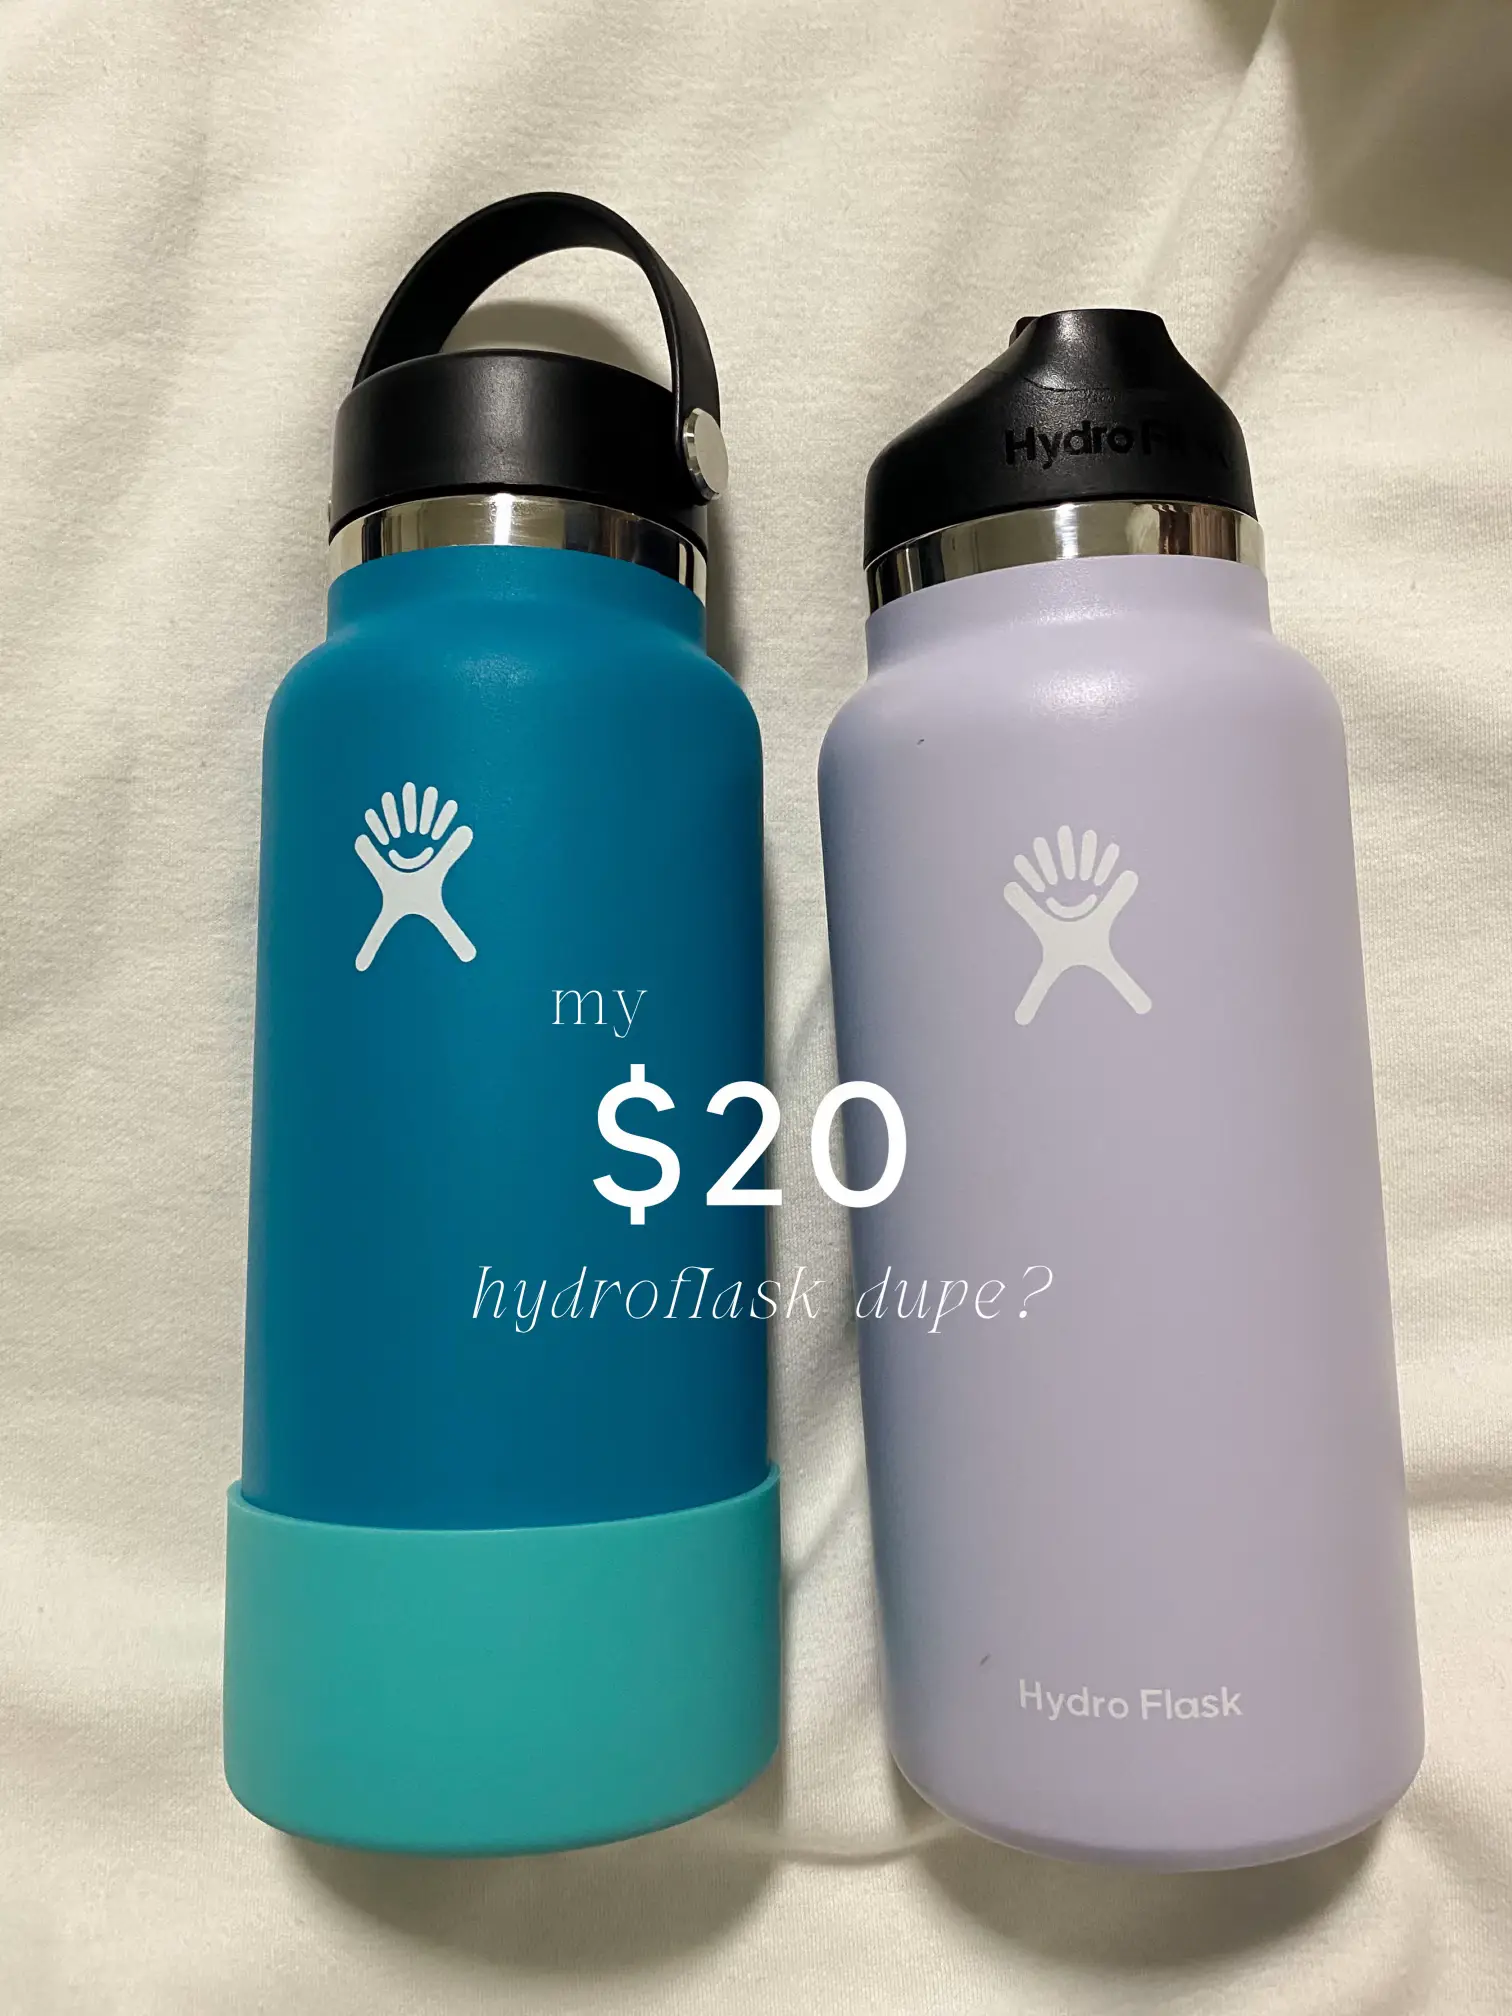 Hydro Flask Tumblers Are on Sale With Tumblers Starting at Just $20